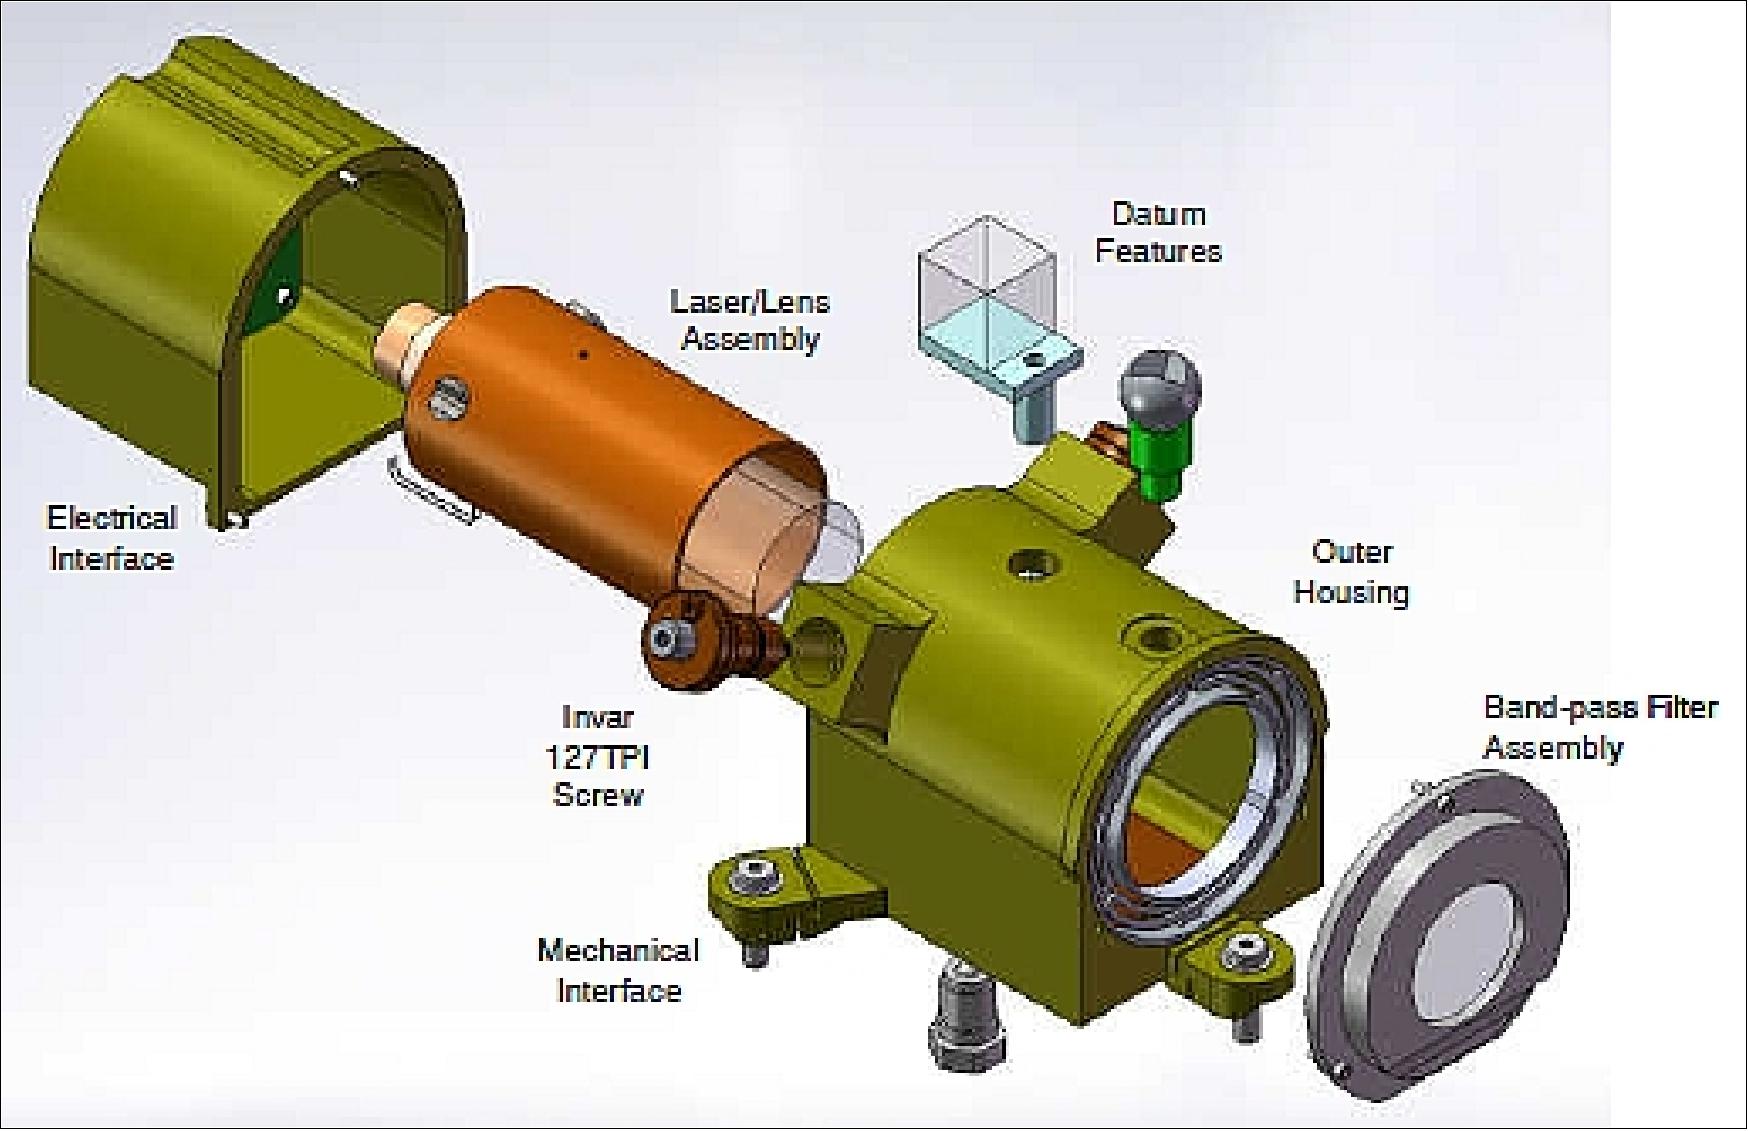 Figure 7: Schematic view of the metrology laser and its components (image credit: NuSTAR collaboration)